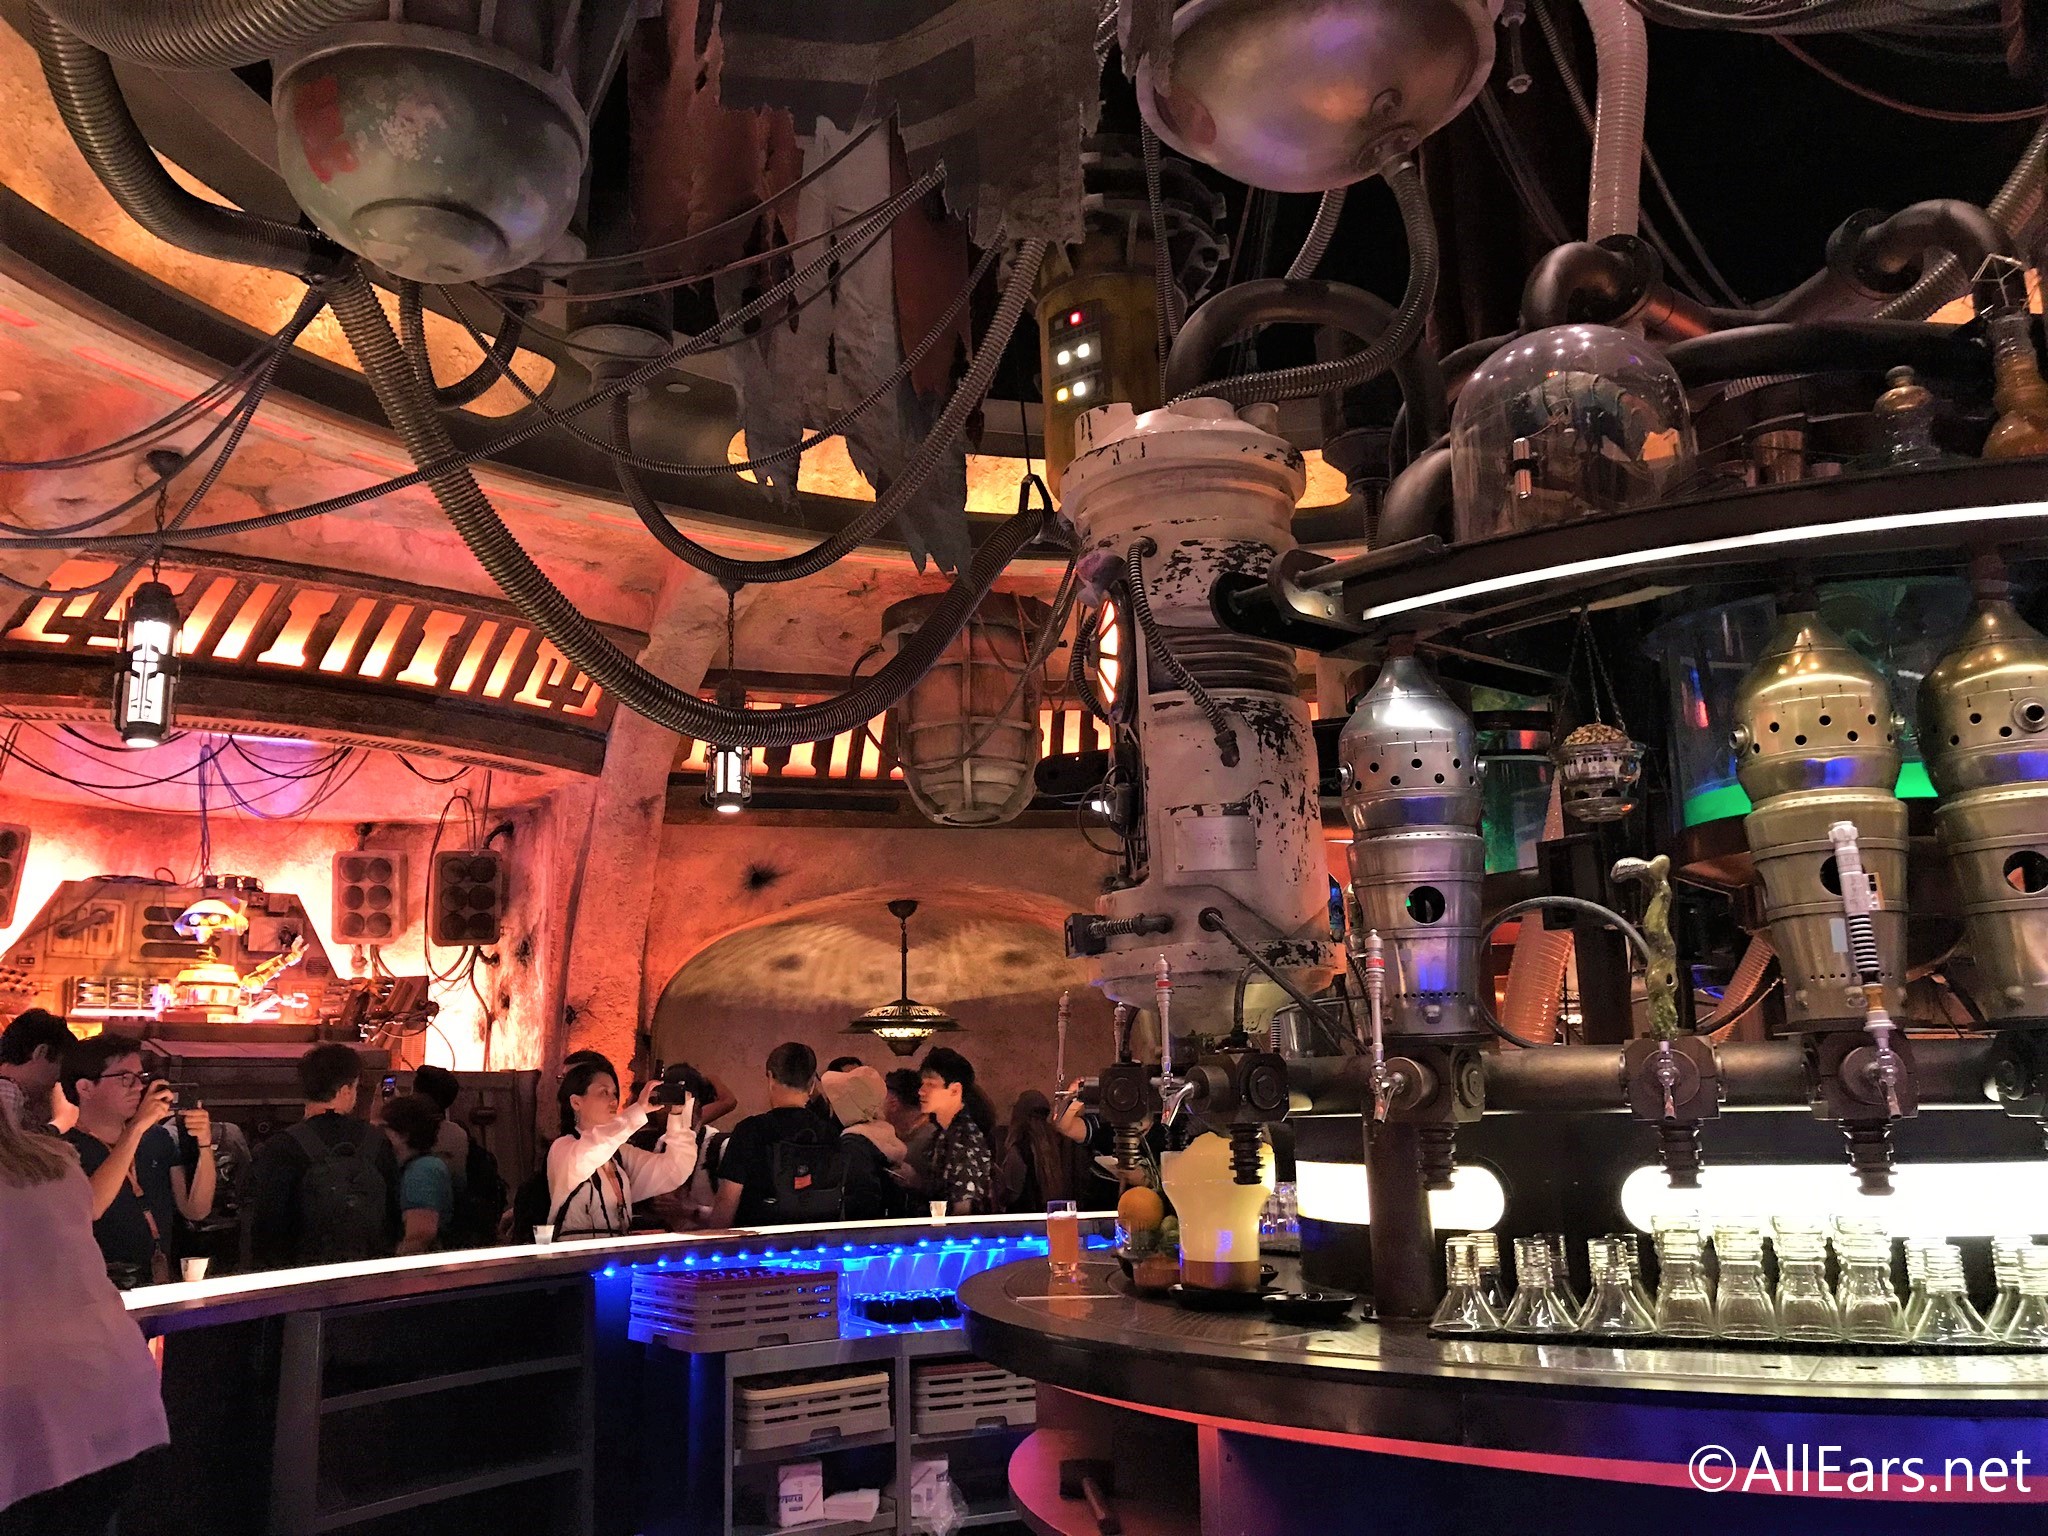 First Look: DJ Rex is on Deck and Drinks Abound at Oga's Cantina at Star Wars: Galaxy's Edge!